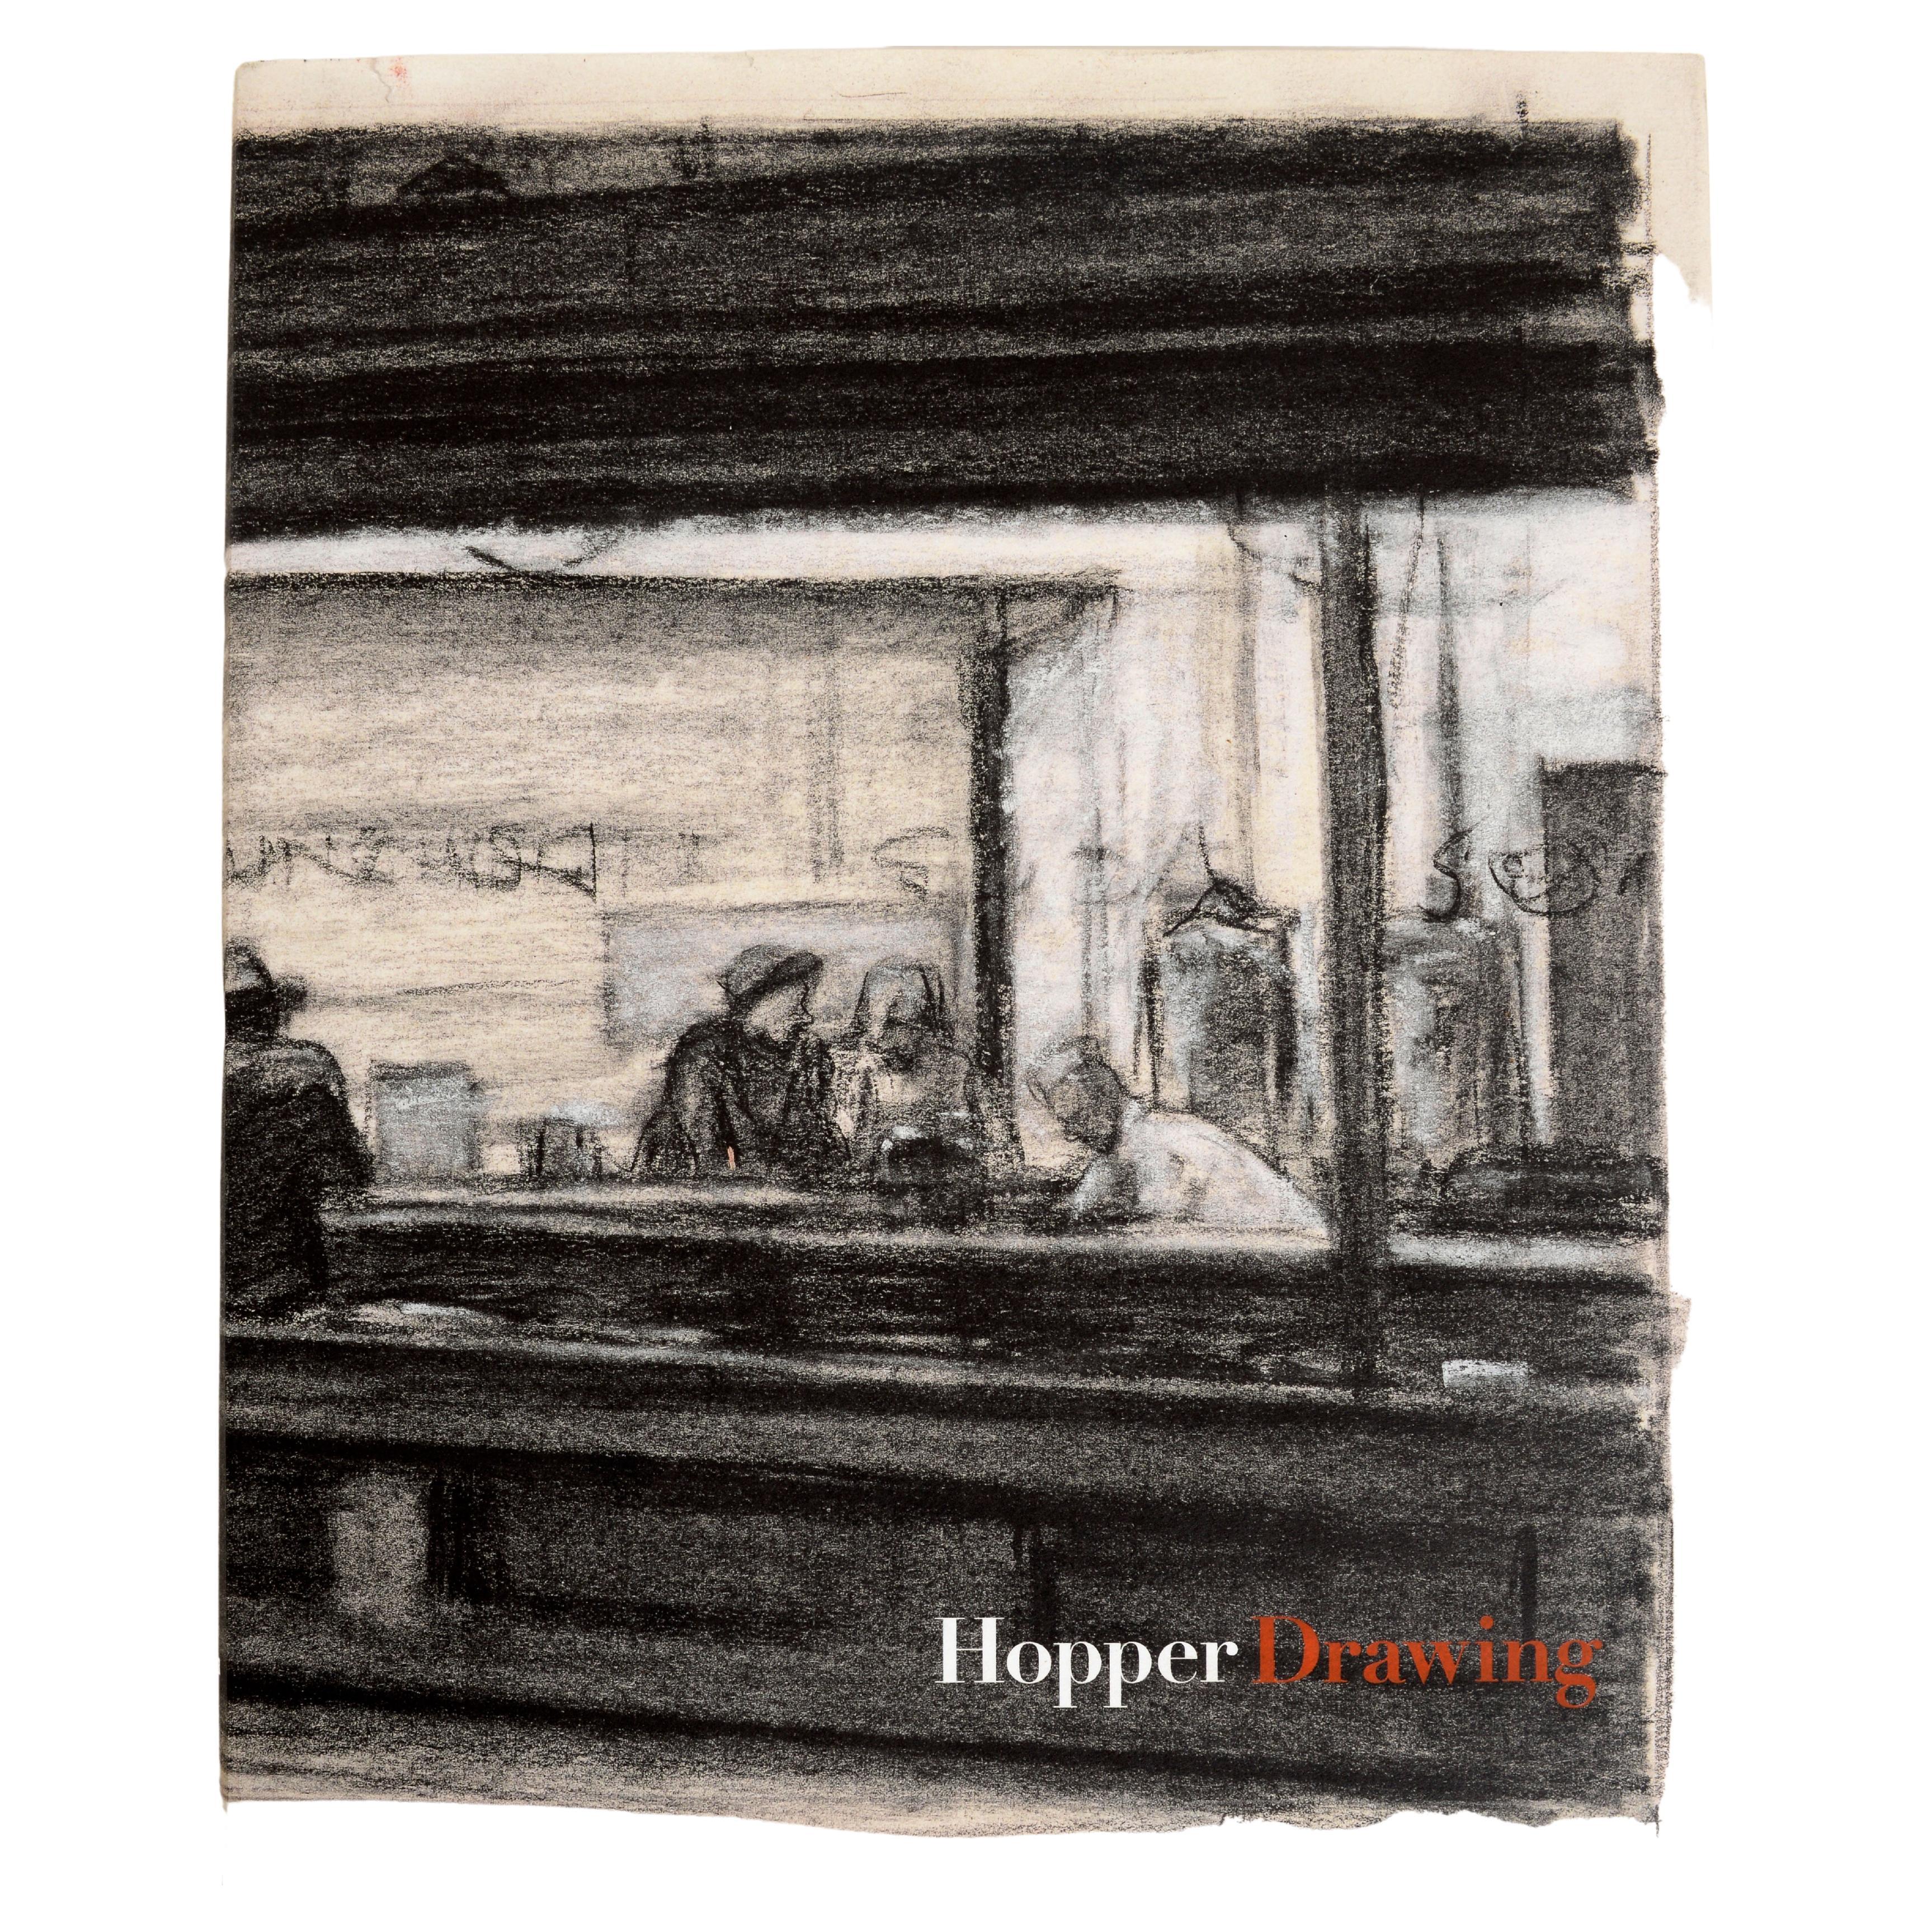 Hopper Drawing by Carter E Foster, 1st Ed